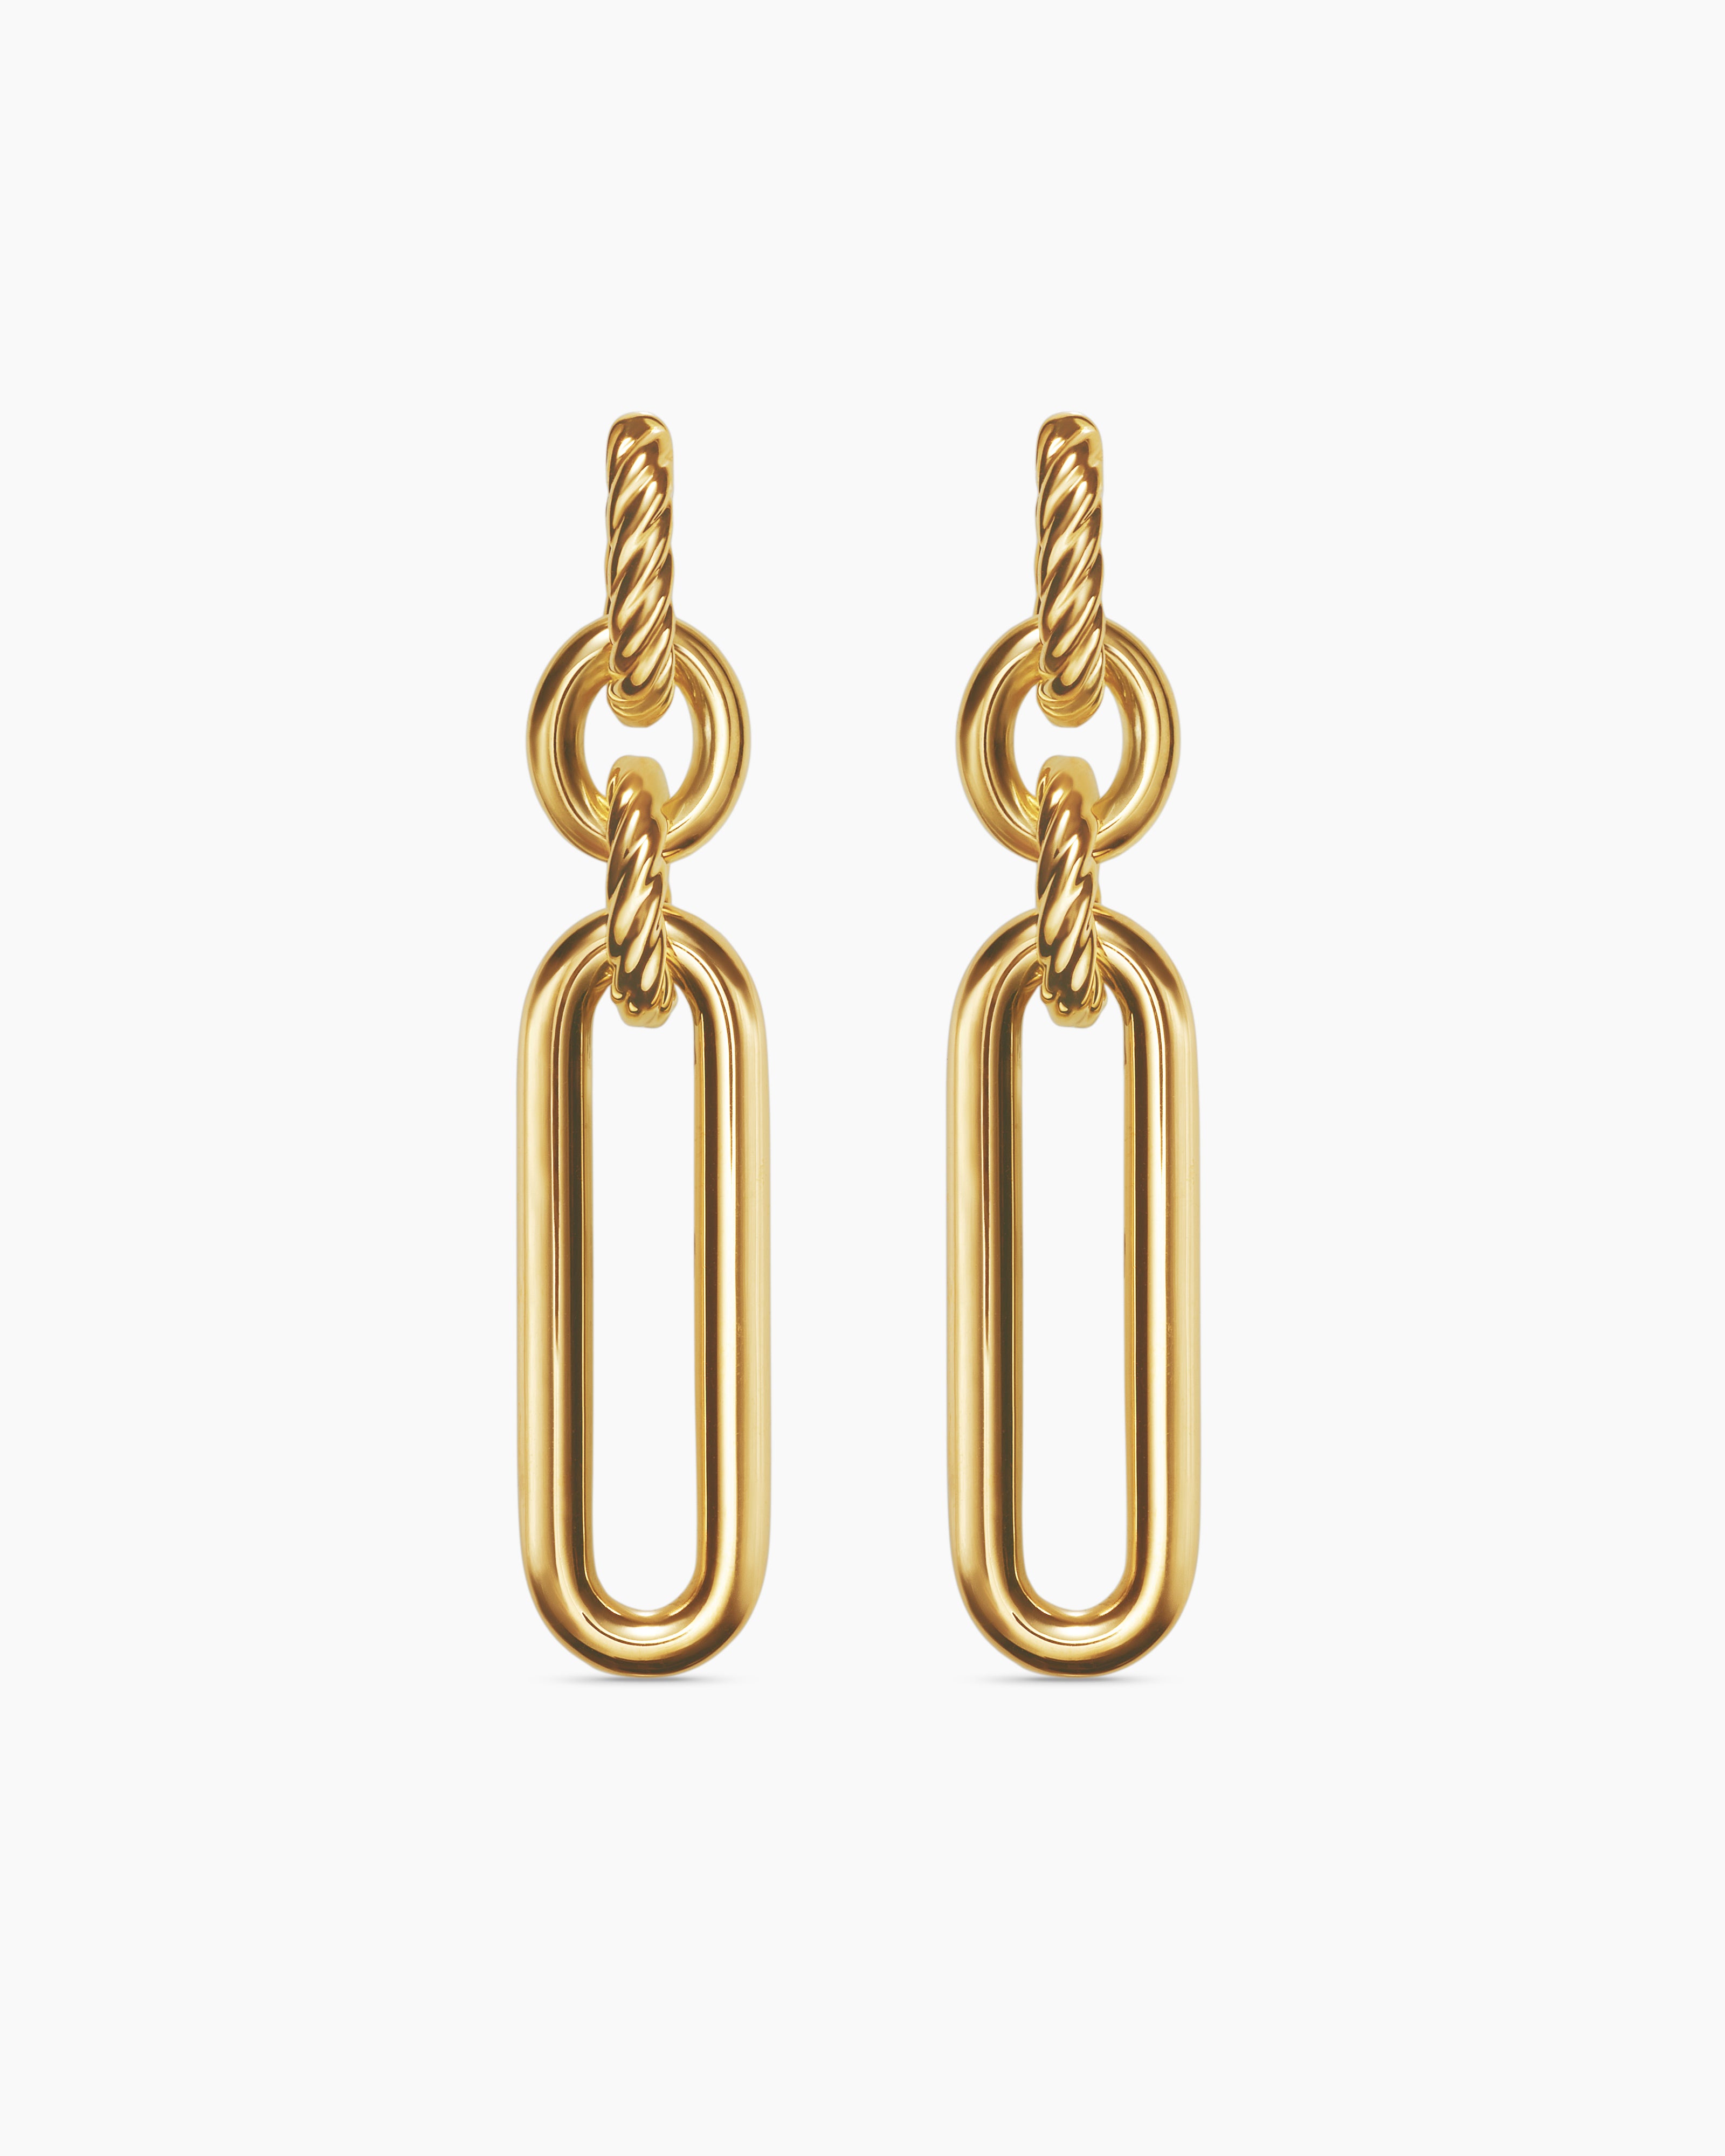 18k Gold Filled OR White Gold Linked Earrings, DIY Chained